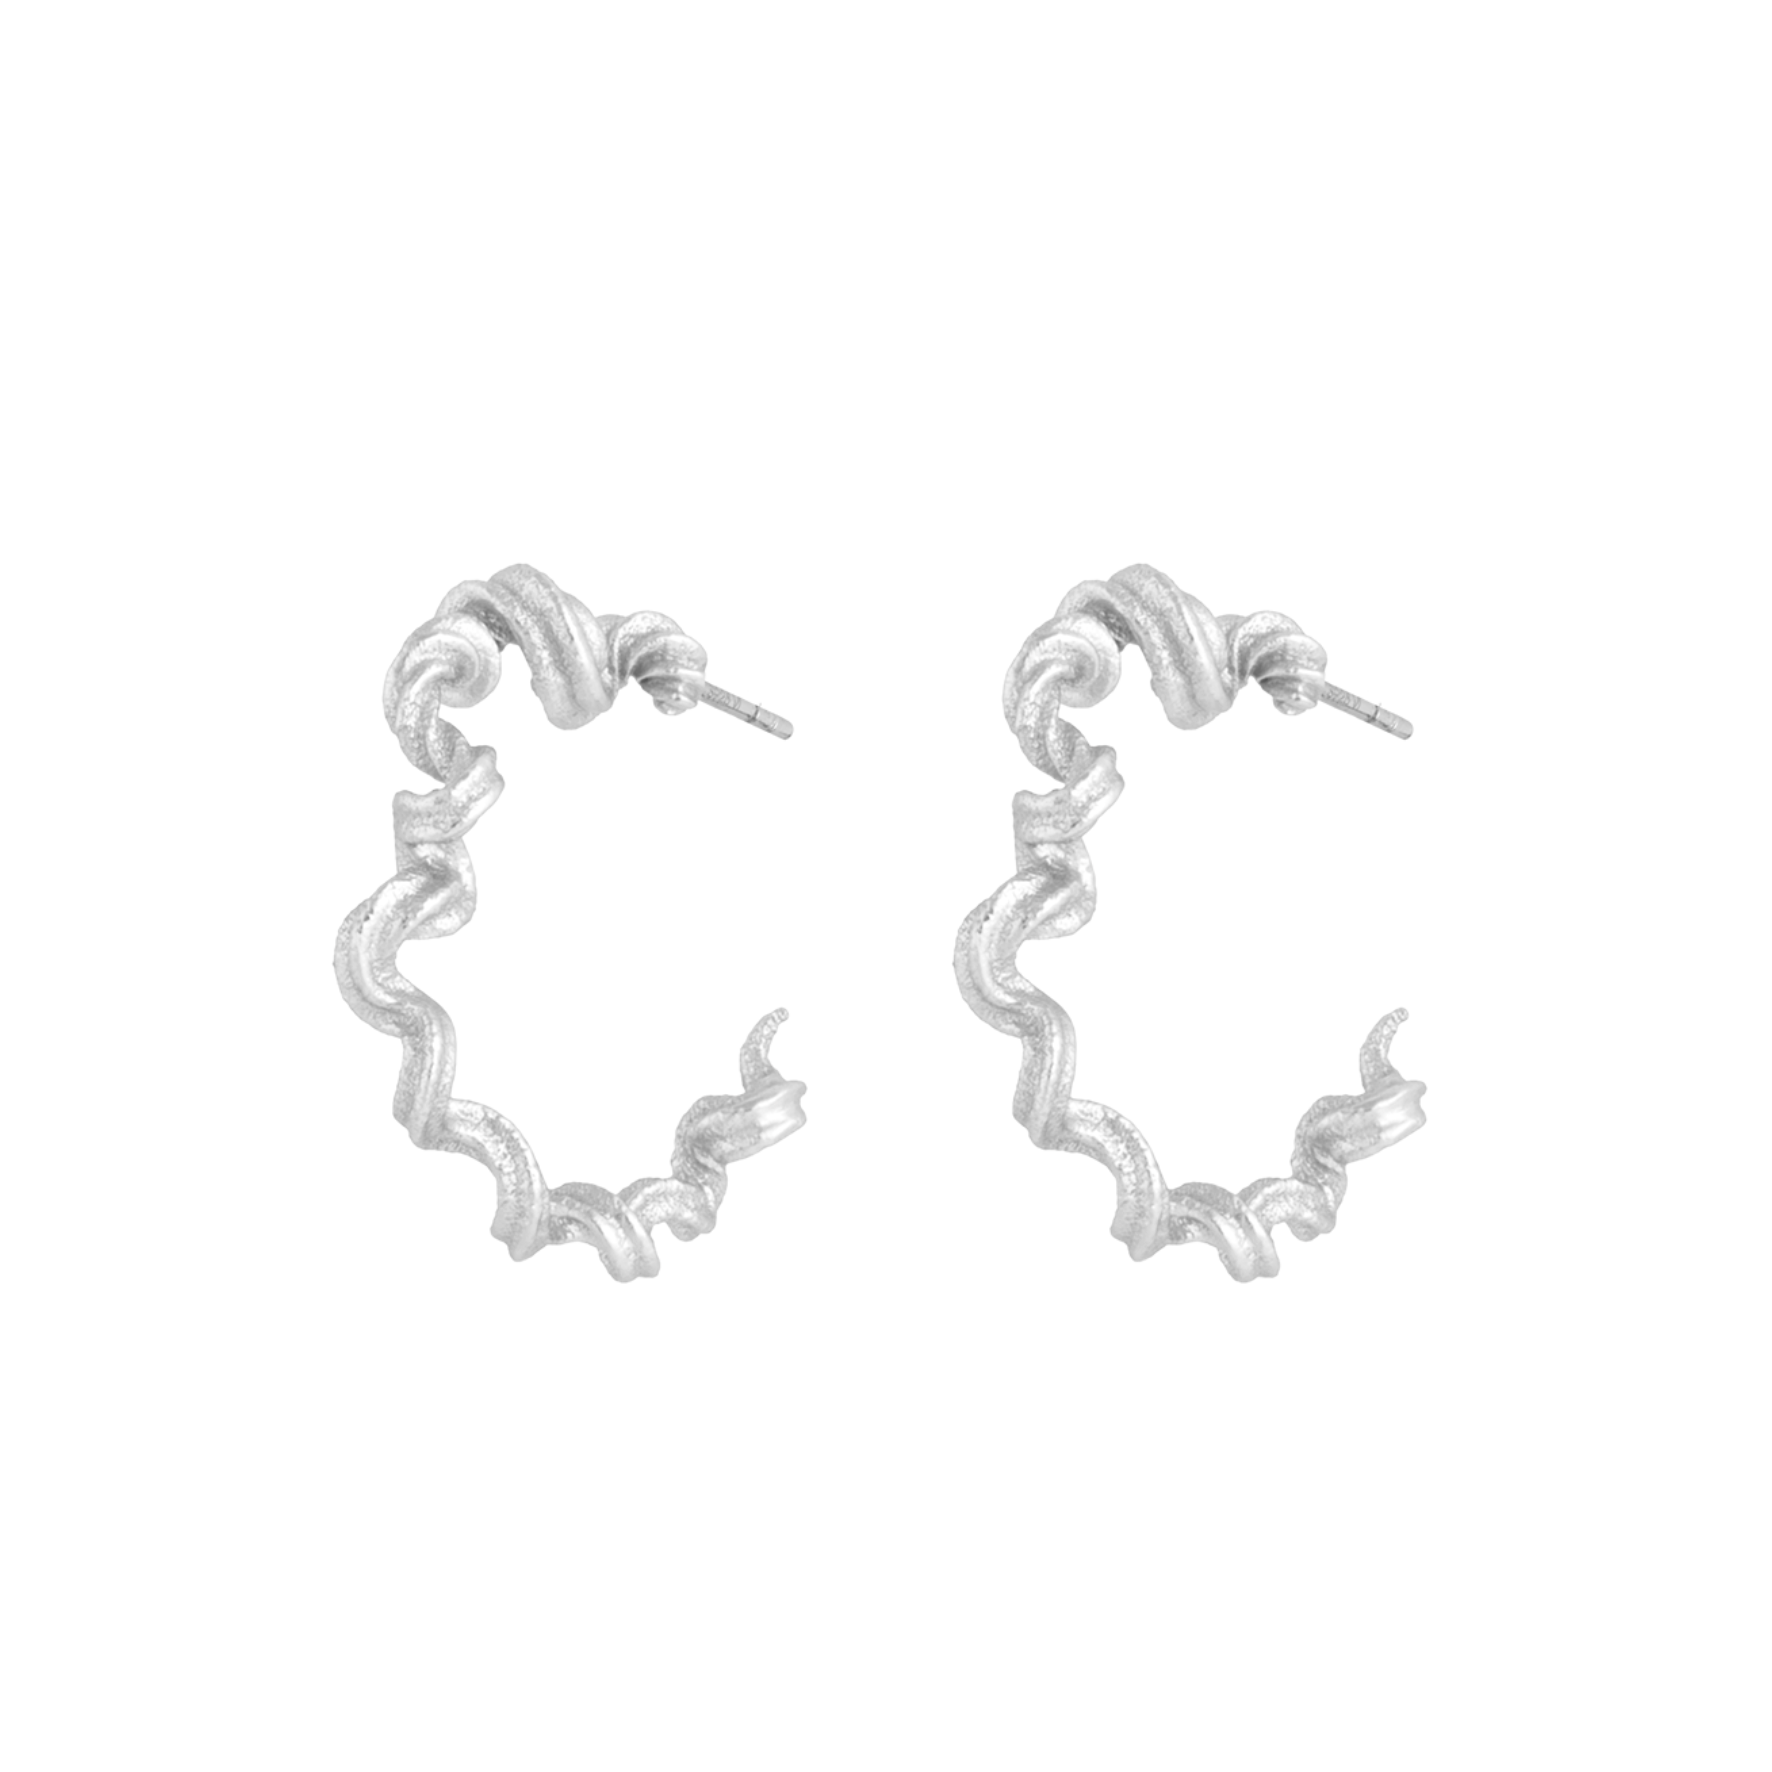 Alchemy Hoop Earrings from House Of Vincent in Silver Sterling 925